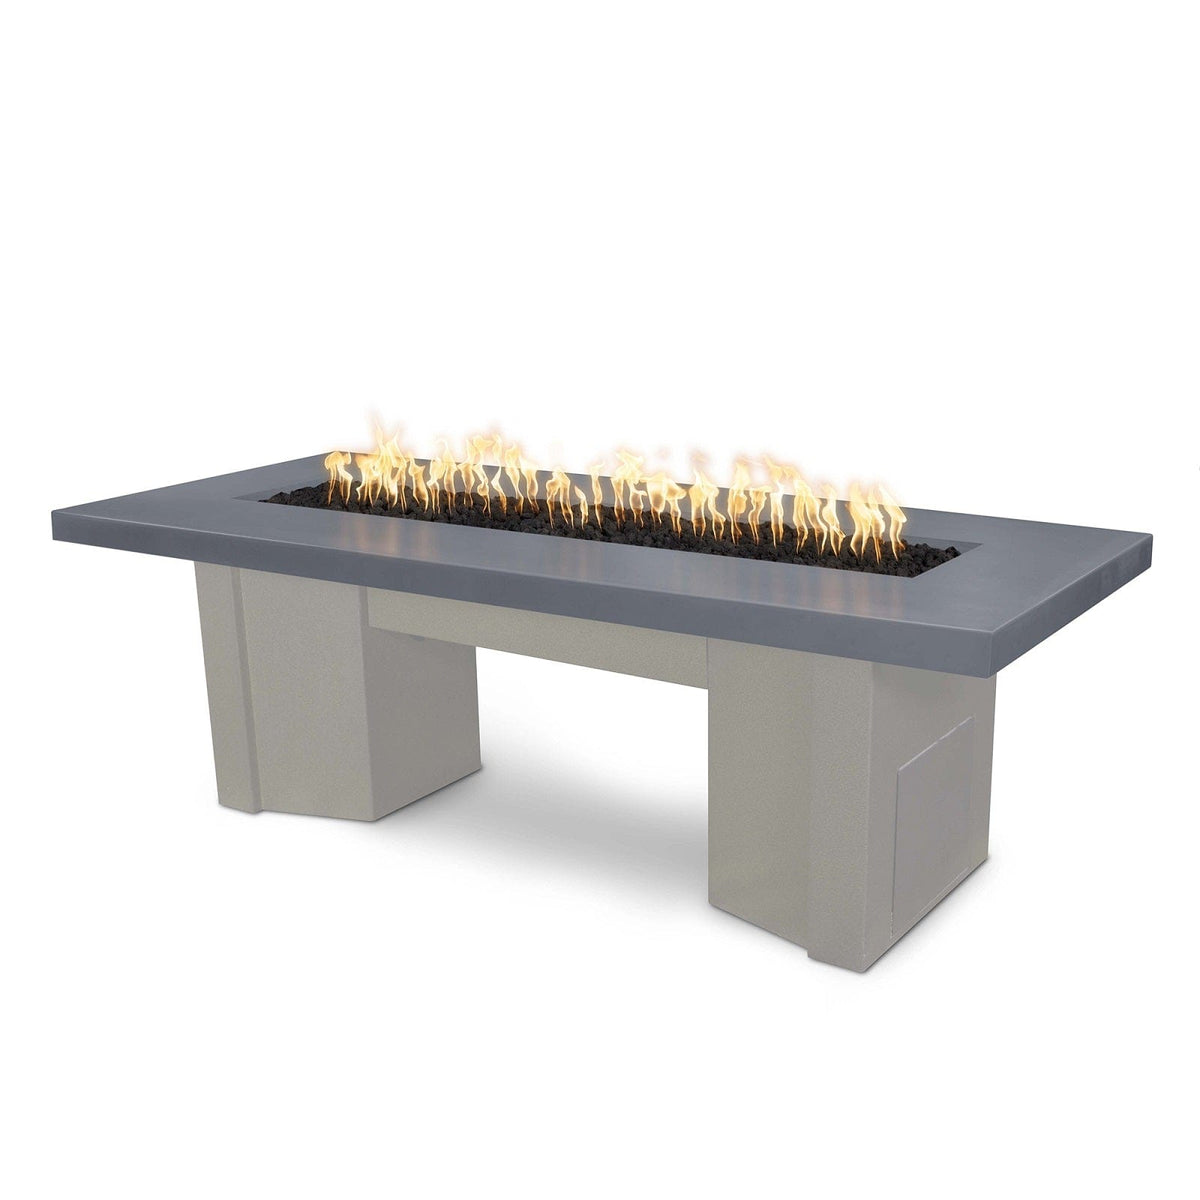 The Outdoor Plus Fire Features Gray (-GRY) / Pewter Powder Coated Steel (-PEW) The Outdoor Plus 60&quot; Alameda Fire Table Smooth Concrete in Liquid Propane - 12V Electronic Ignition / OPT-ALMGFRC60E12V-LP